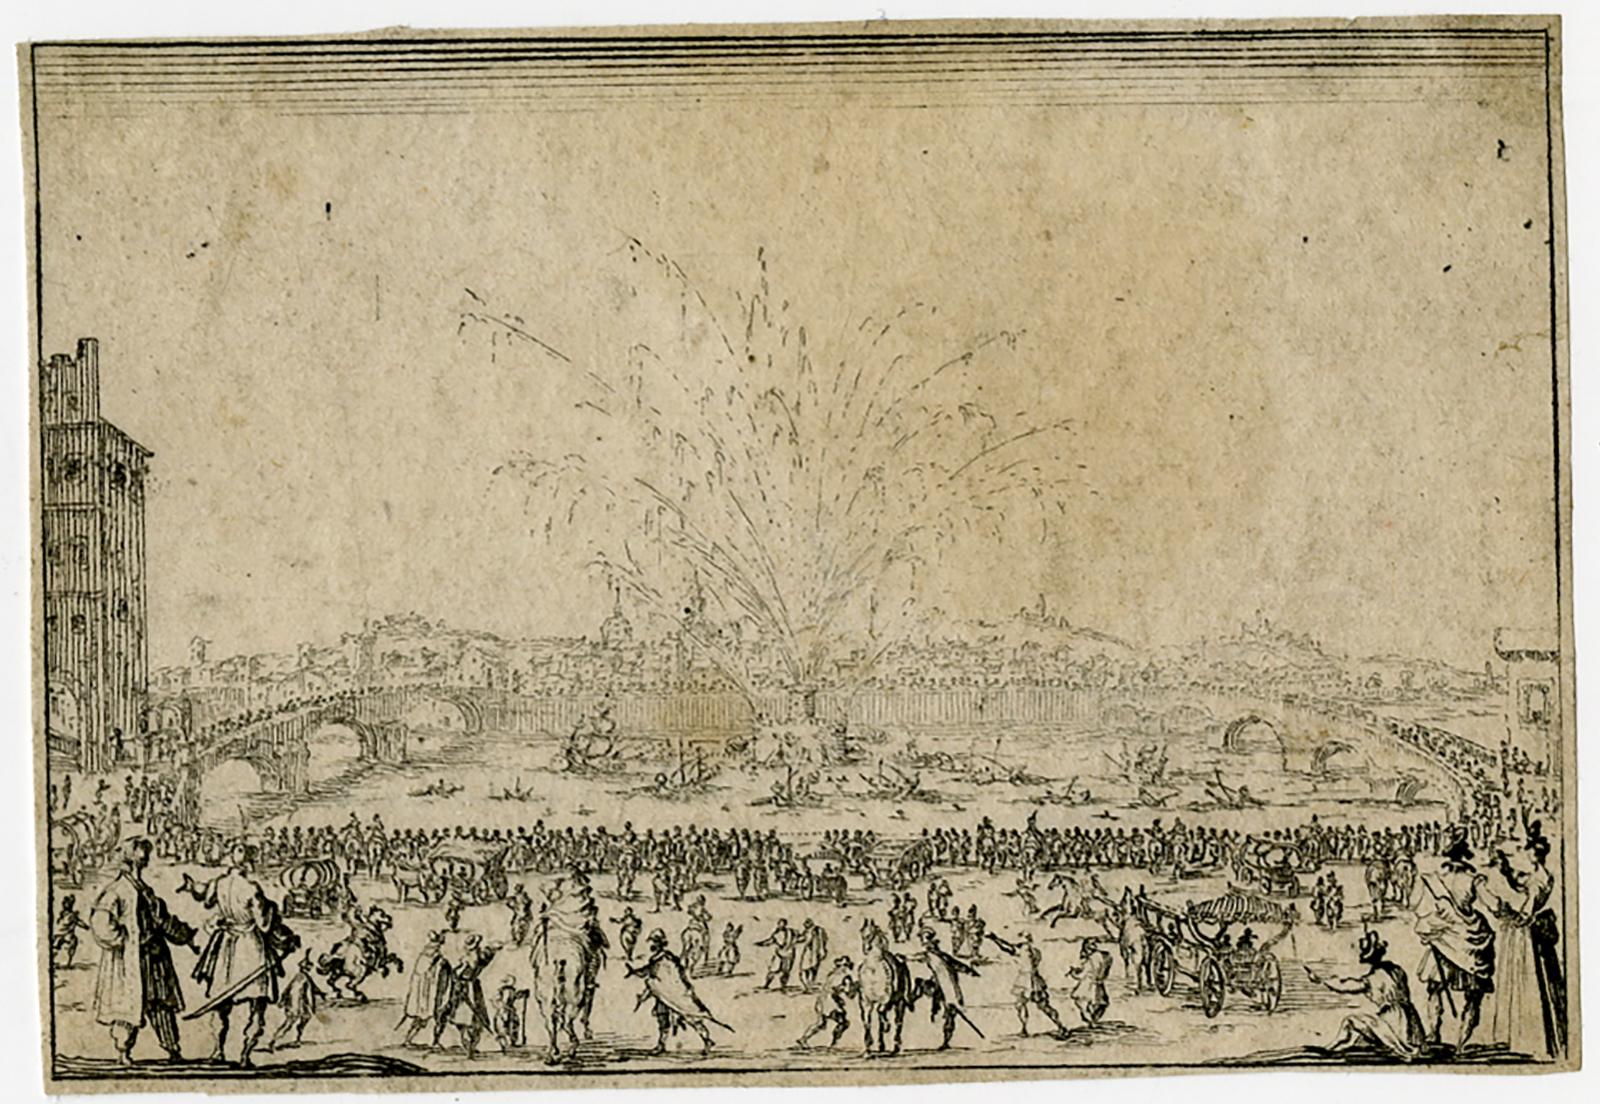 Subject:  Antique Master Print, untitled.  - Fireworks on the river Arno in Florence.

Description:  From the Florence set. Ref: L 258/ M 856.

Artists and Engravers:  Made by 'Jacques Callot' after own design. Jacques Callot (Nancy 1592-1635) was a